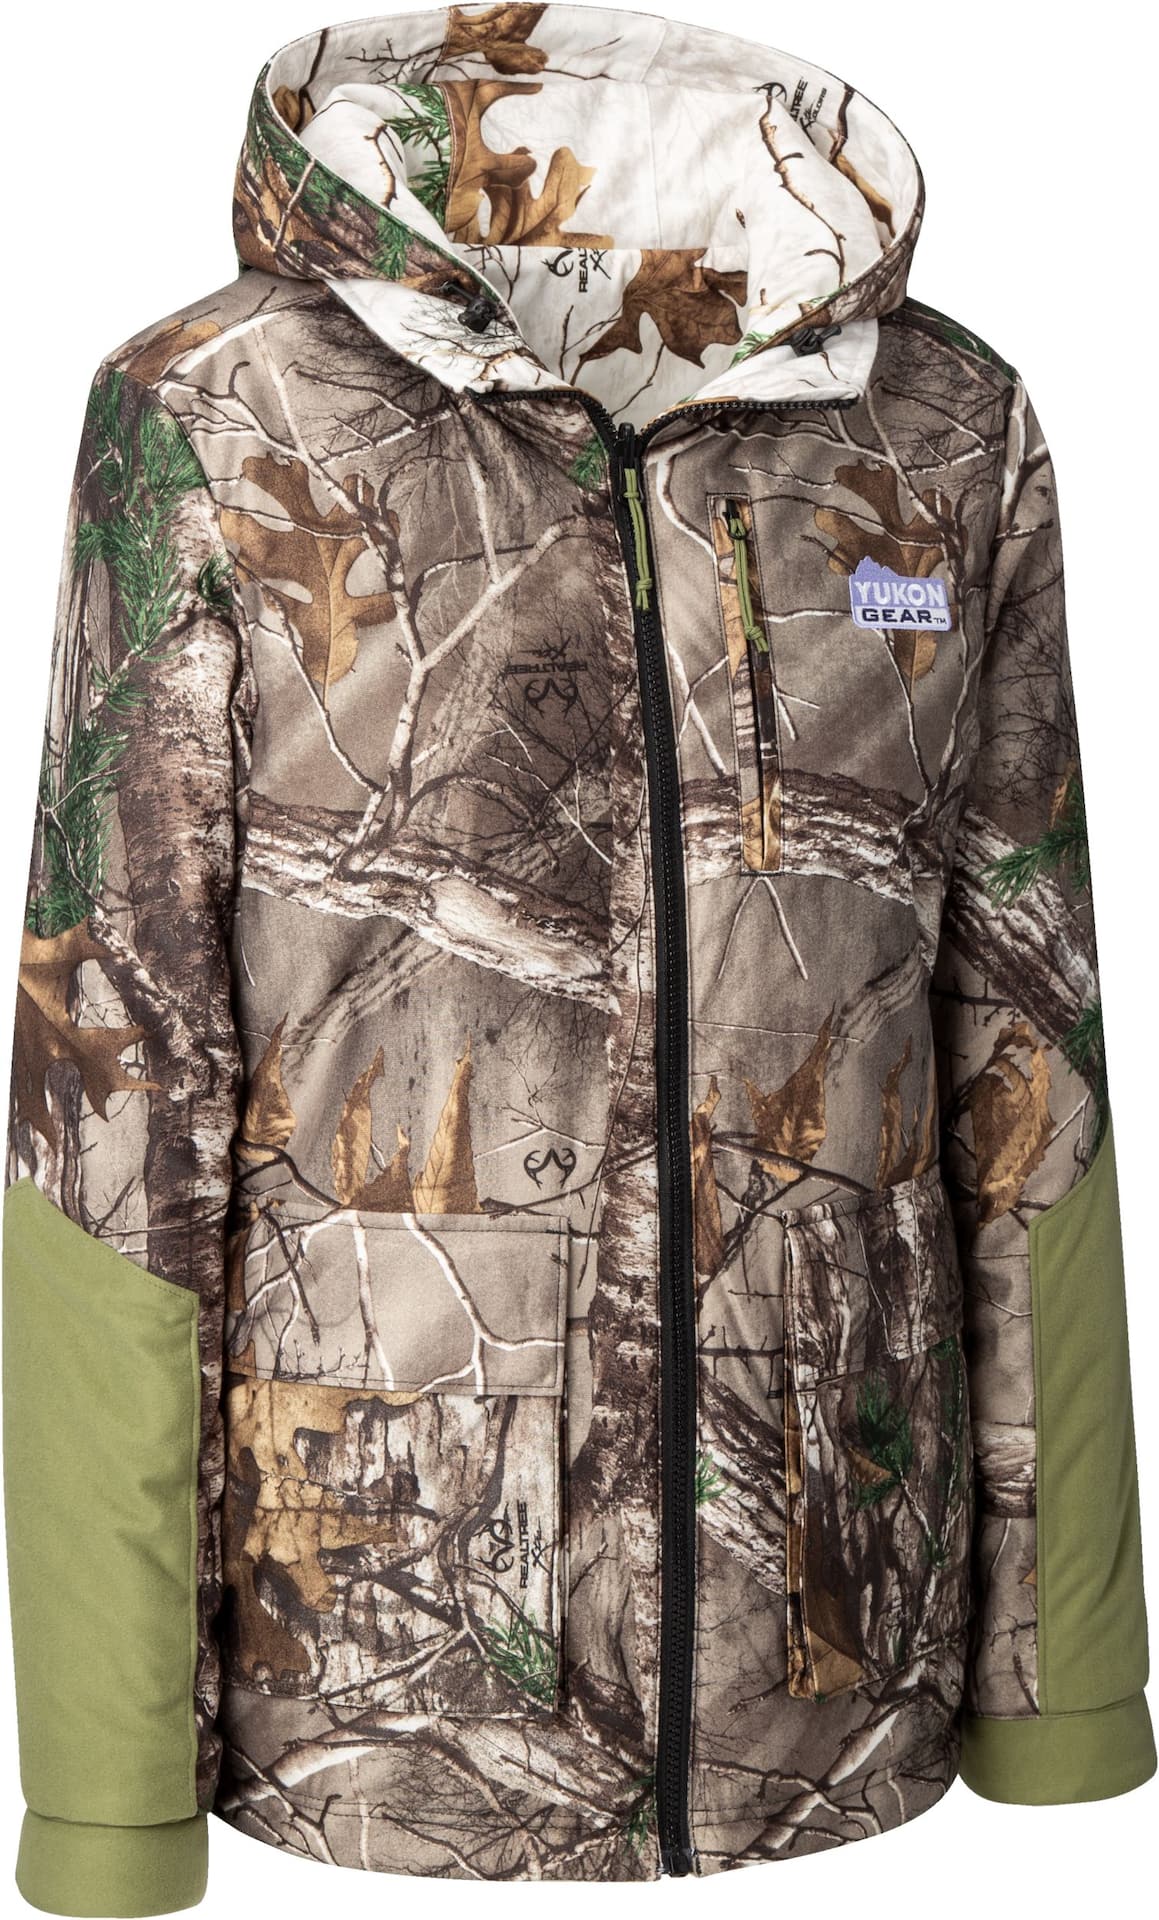 https://media-www.canadiantire.ca/product/playing/hunting/hunting-apparel-footwear/3751196/yukon-gear-womens-aurora-reversible-parka-rt-m-758208ab-a732-4c54-a128-a740bc01e356-jpgrendition.jpg